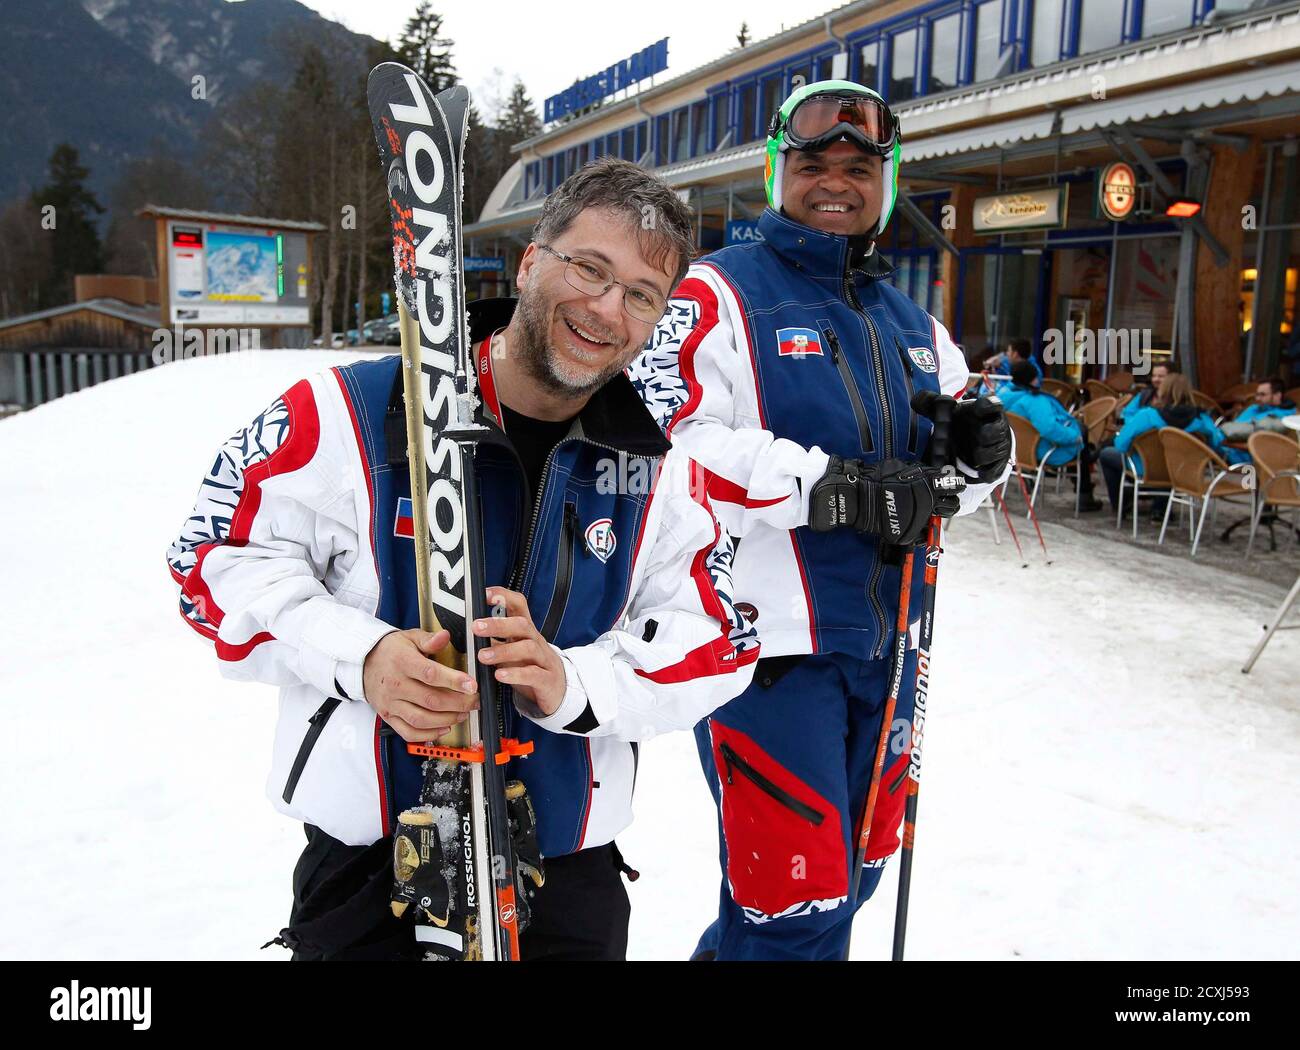 Haitian skier Jean-Pierre Roy (R) and his French coach Thierry Montillet  pack up their skis after a training at the World Alpine skiing  Championships in Garmisch Partenkirchen February 11, 2011. Roy, 47,